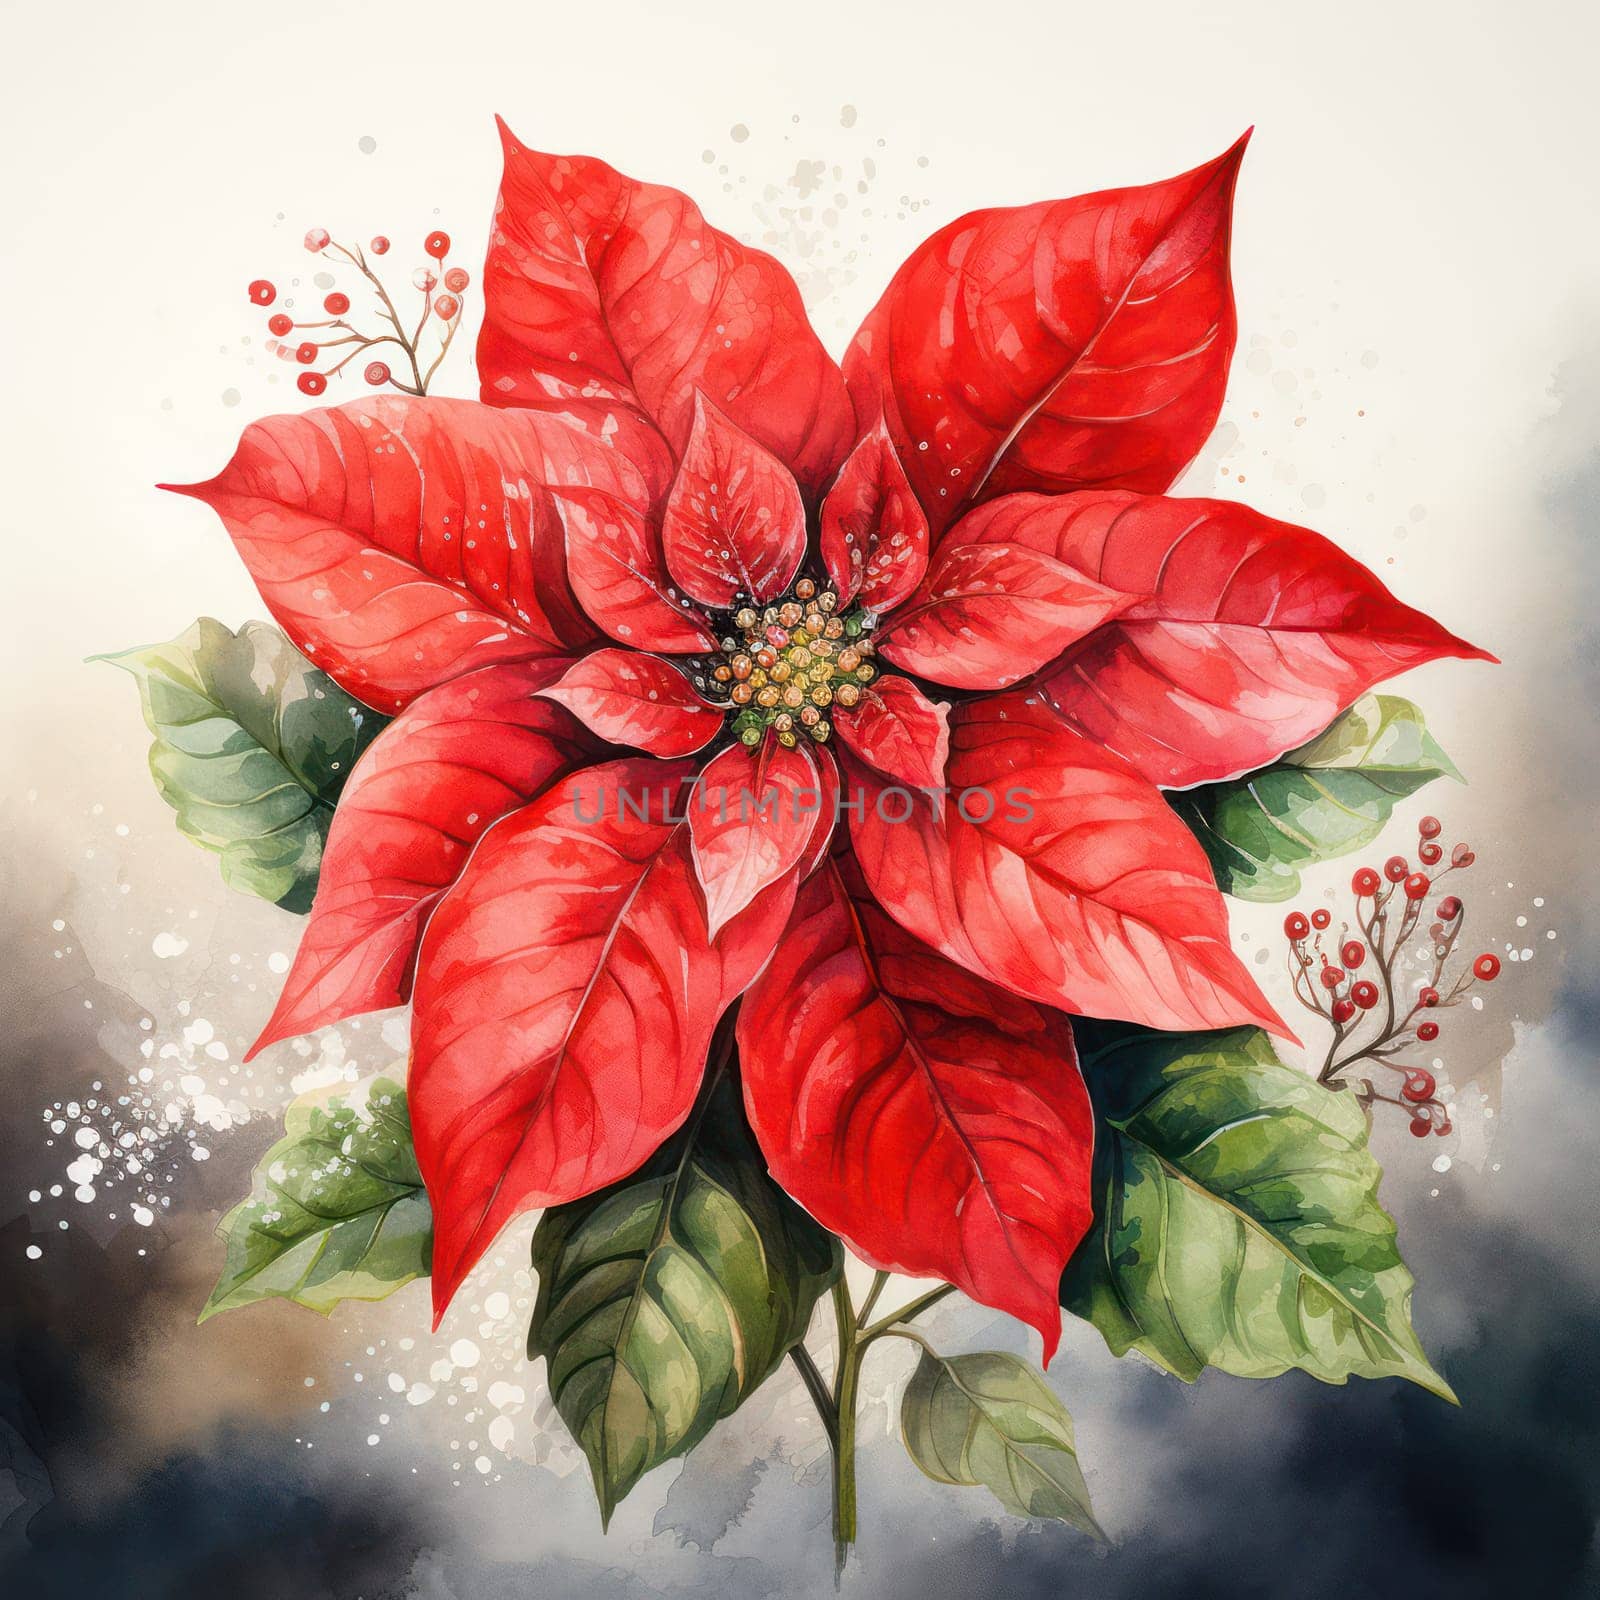 Festive Floral Delight: Red Poinsettia Blossom, a Symbol of Christmas Celebration, Painted with Watercolors on a Vintage Hand-drawn Illustration, Blooming Beautifully on a Green Leafy Branch, Creating a Bright Botanical Pattern, Perfect for Holiday Greeting Cards and Gifts.